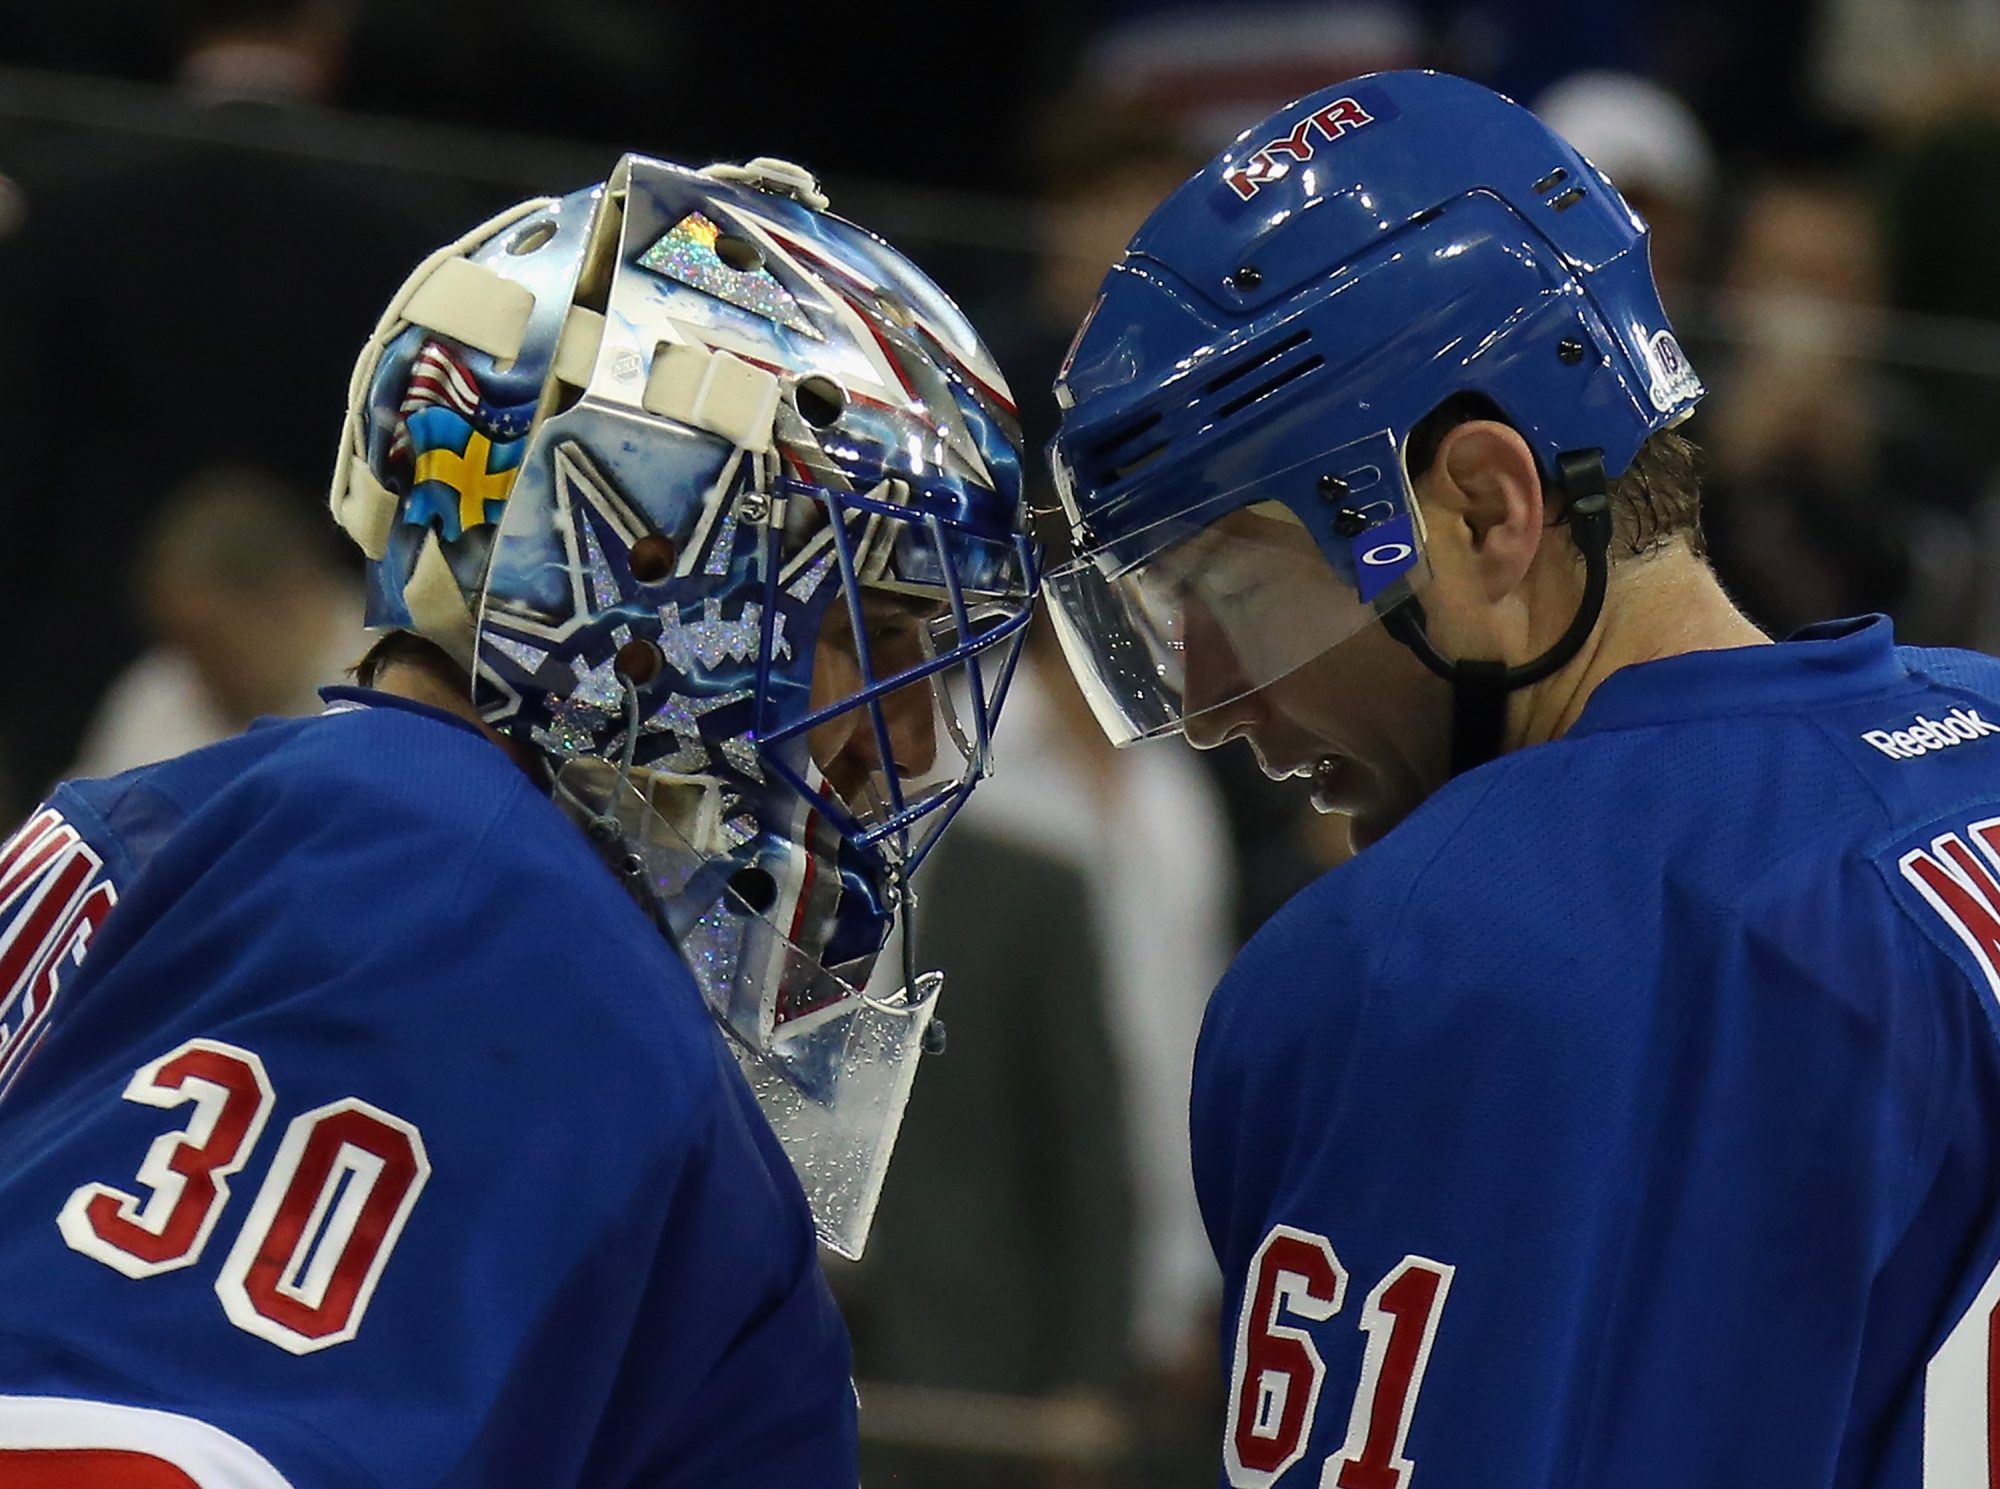 New York Rangers: Lundqvist, Nash Among Best Players to Not Win Stanley Cup 